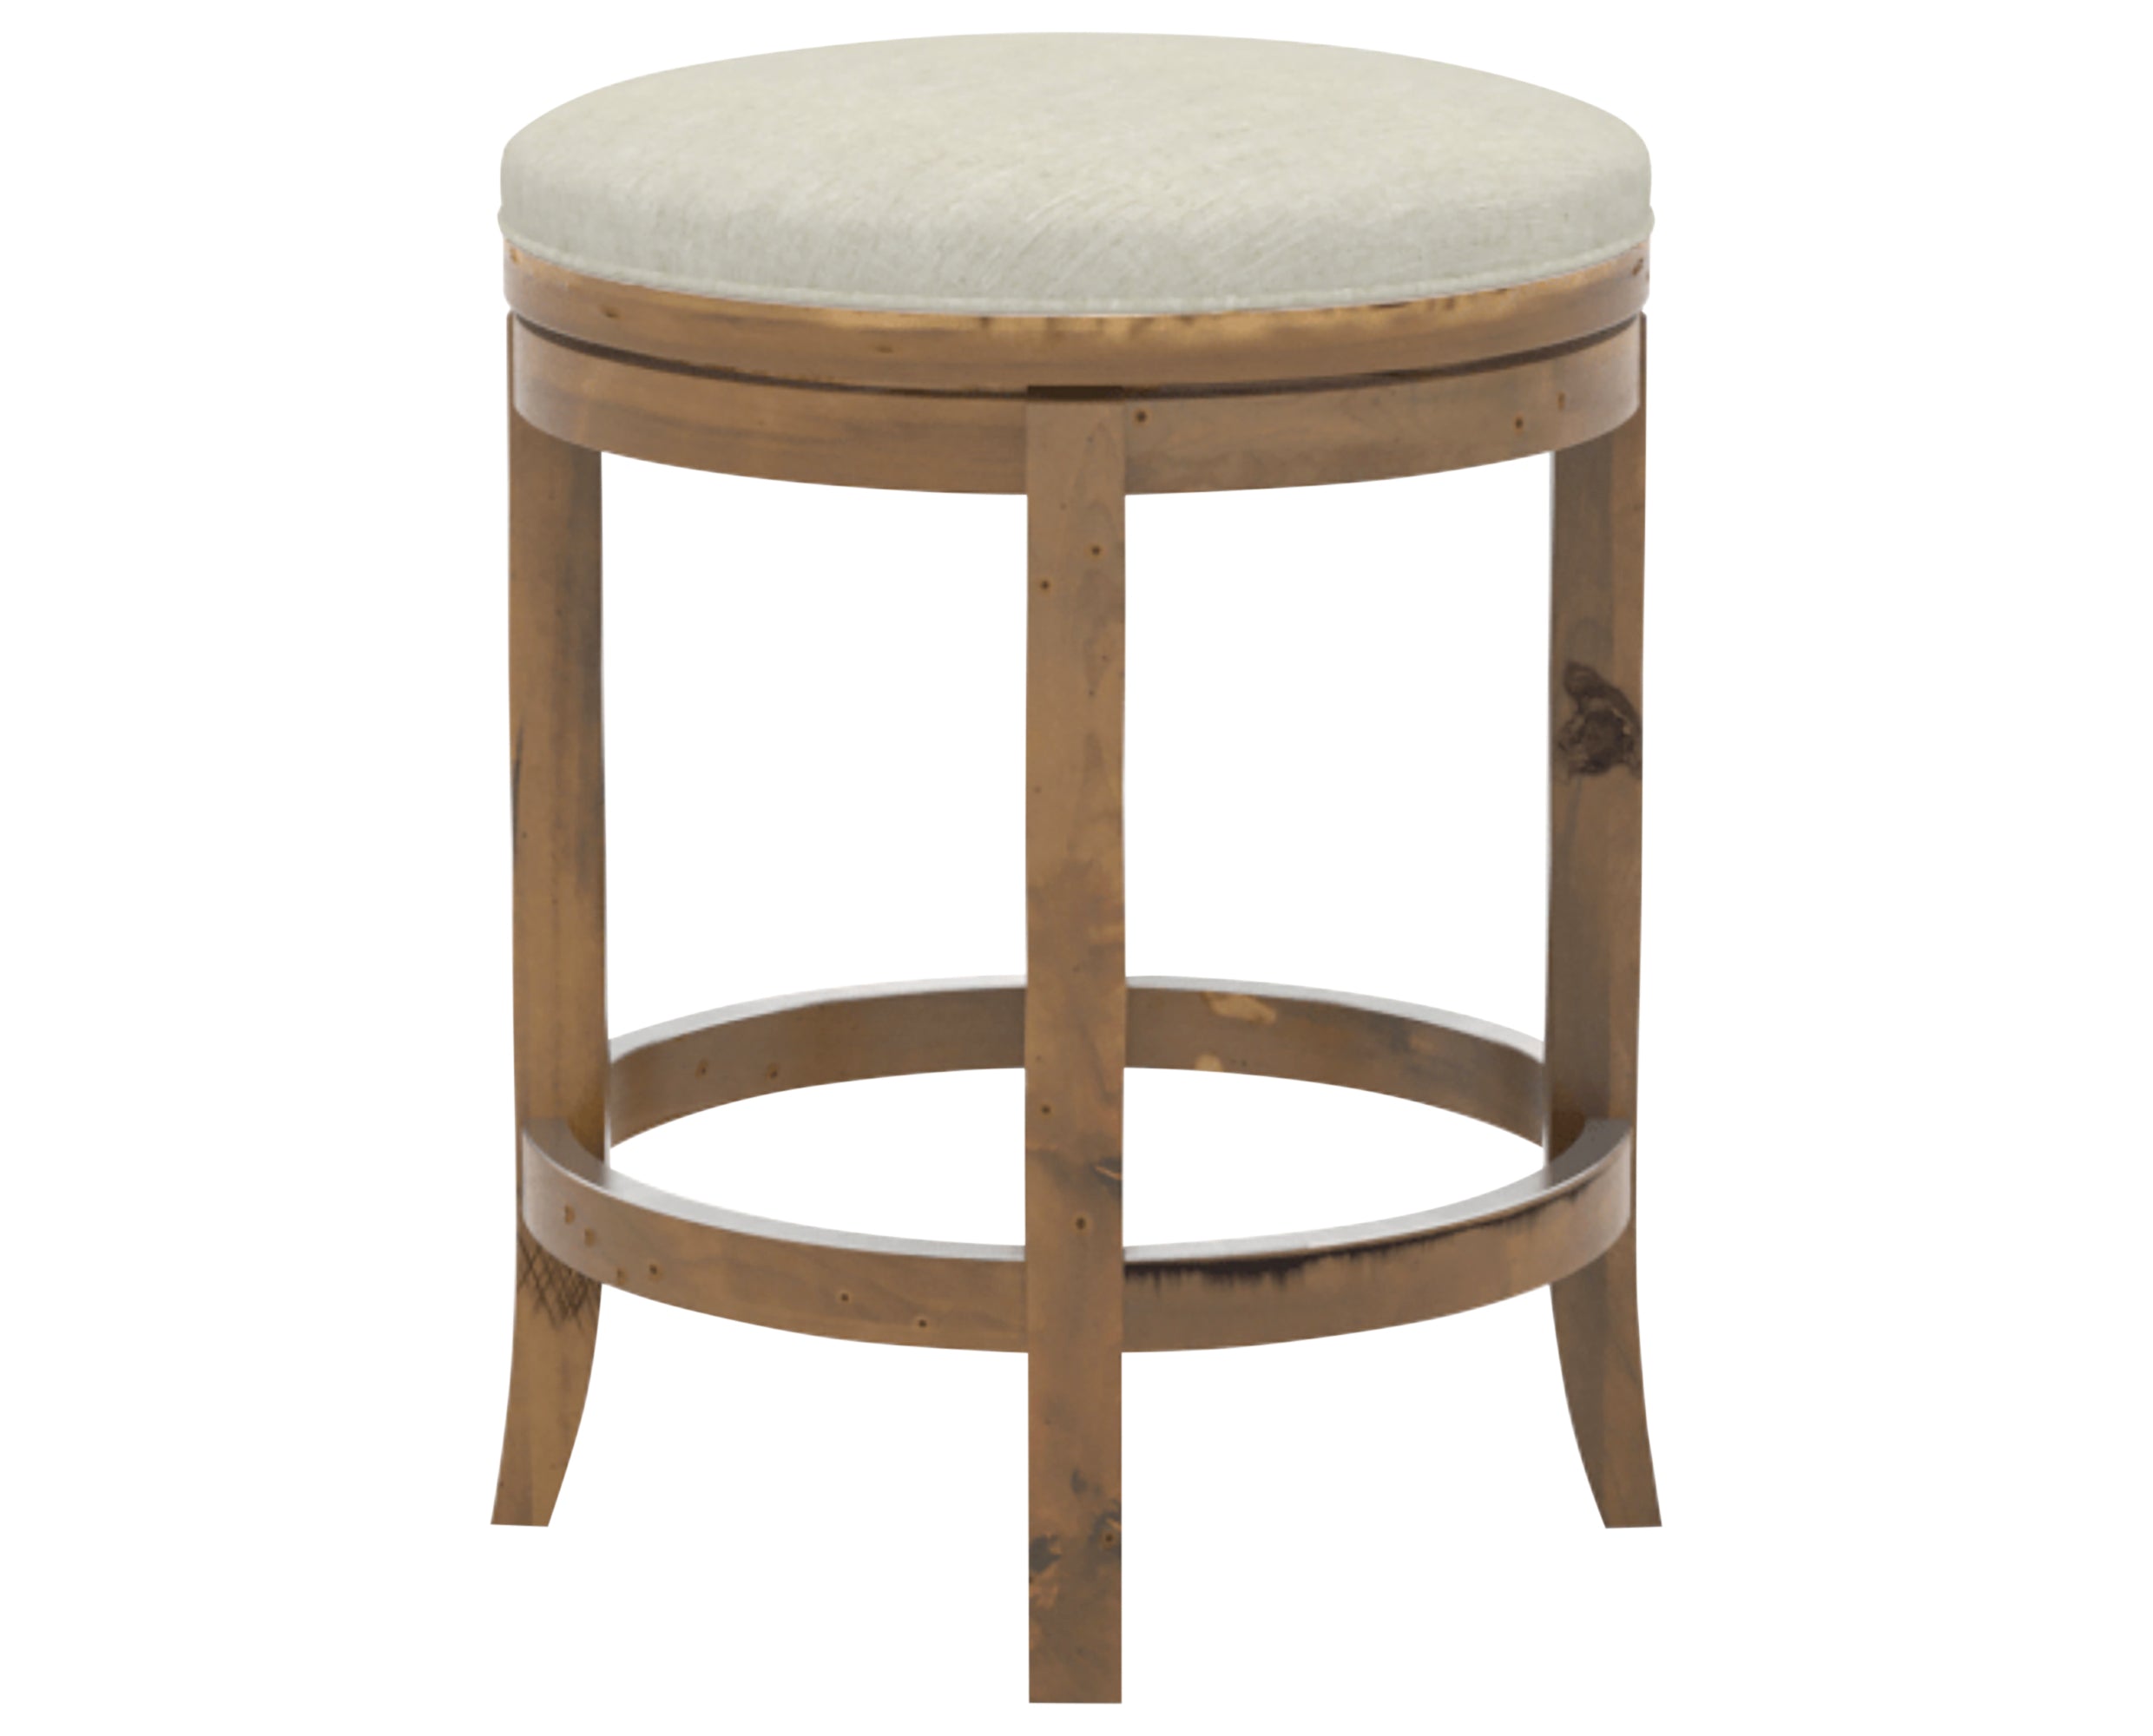 Oak Washed &amp; Fabric TW | Canadel Champlain Counter Stool 8004 | Valley Ridge Furniture